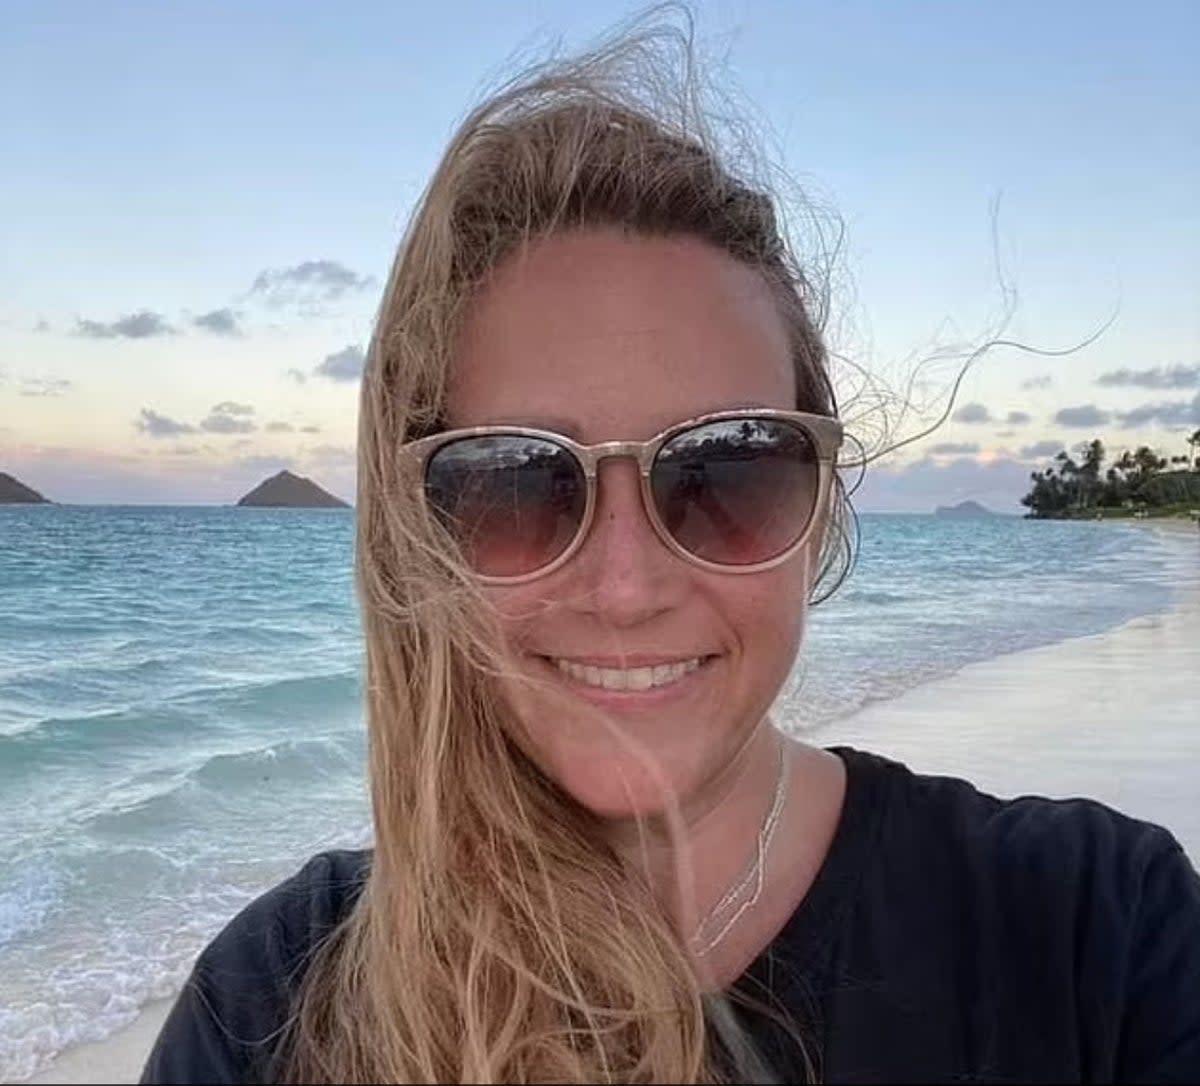 The body of teacher Amanda Webster, 44, was found in Puerto Rico (Facebook)